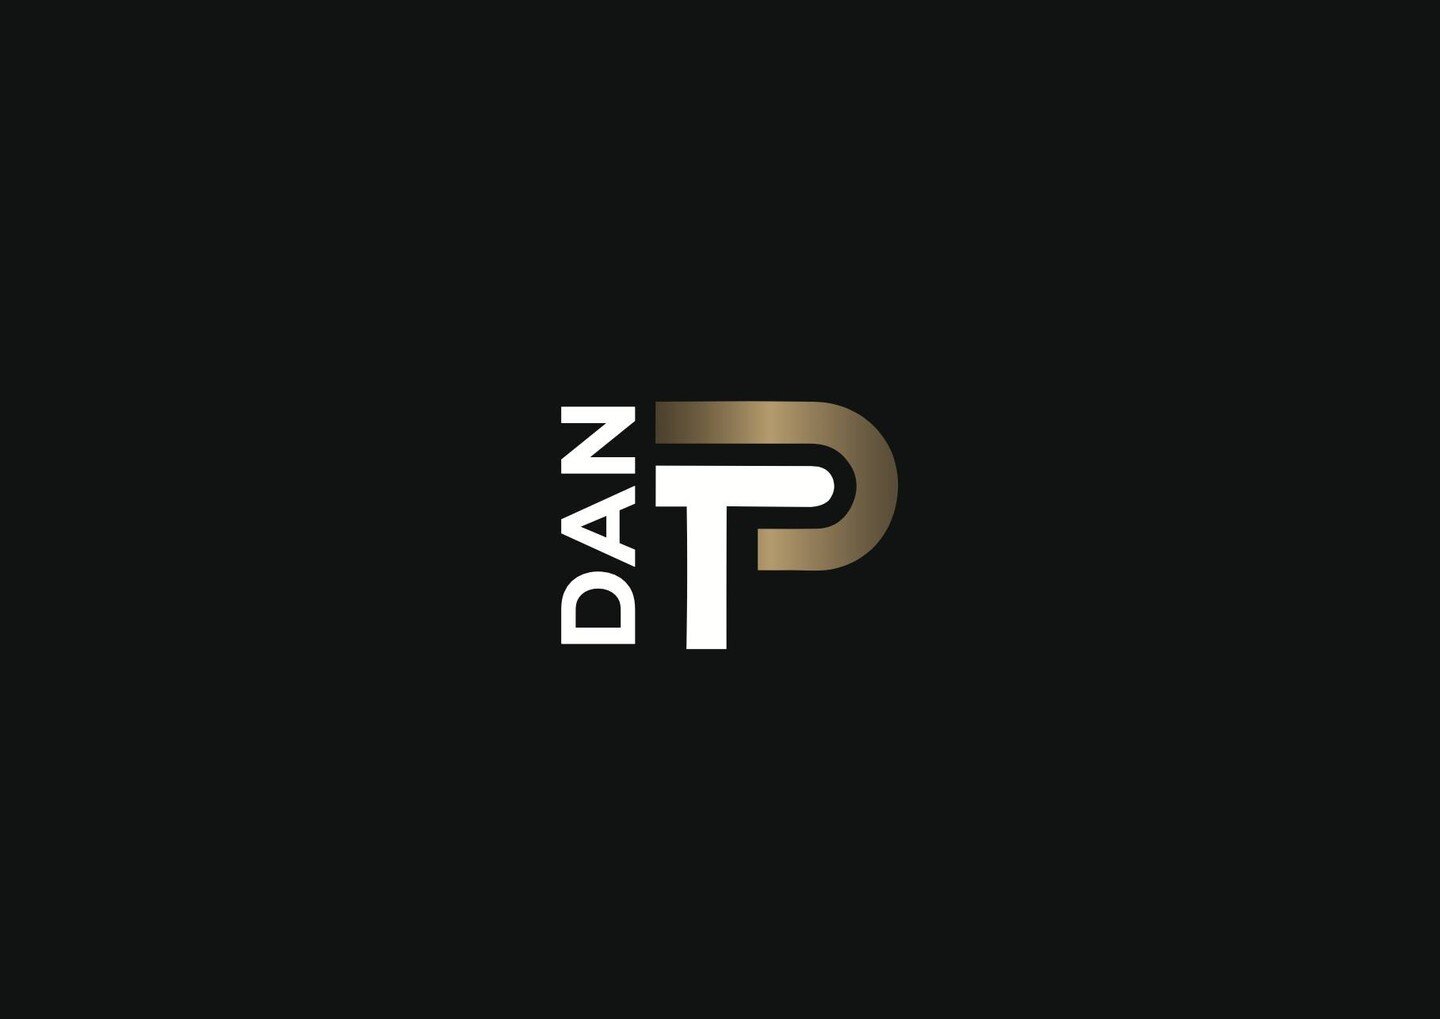 LOGO DESIGN // DAN PT
​​​​​​​​
Love this bold black and gold colour palette we went for with this branding.
​​​​​​​​​​​​​​​​​​​​​​​
​​​​​​​​​​​​​​​​​​​​​​​
#logodesign #logo #graphicdesign #branding #design #logodesigner #graphicdesigner #designer #a